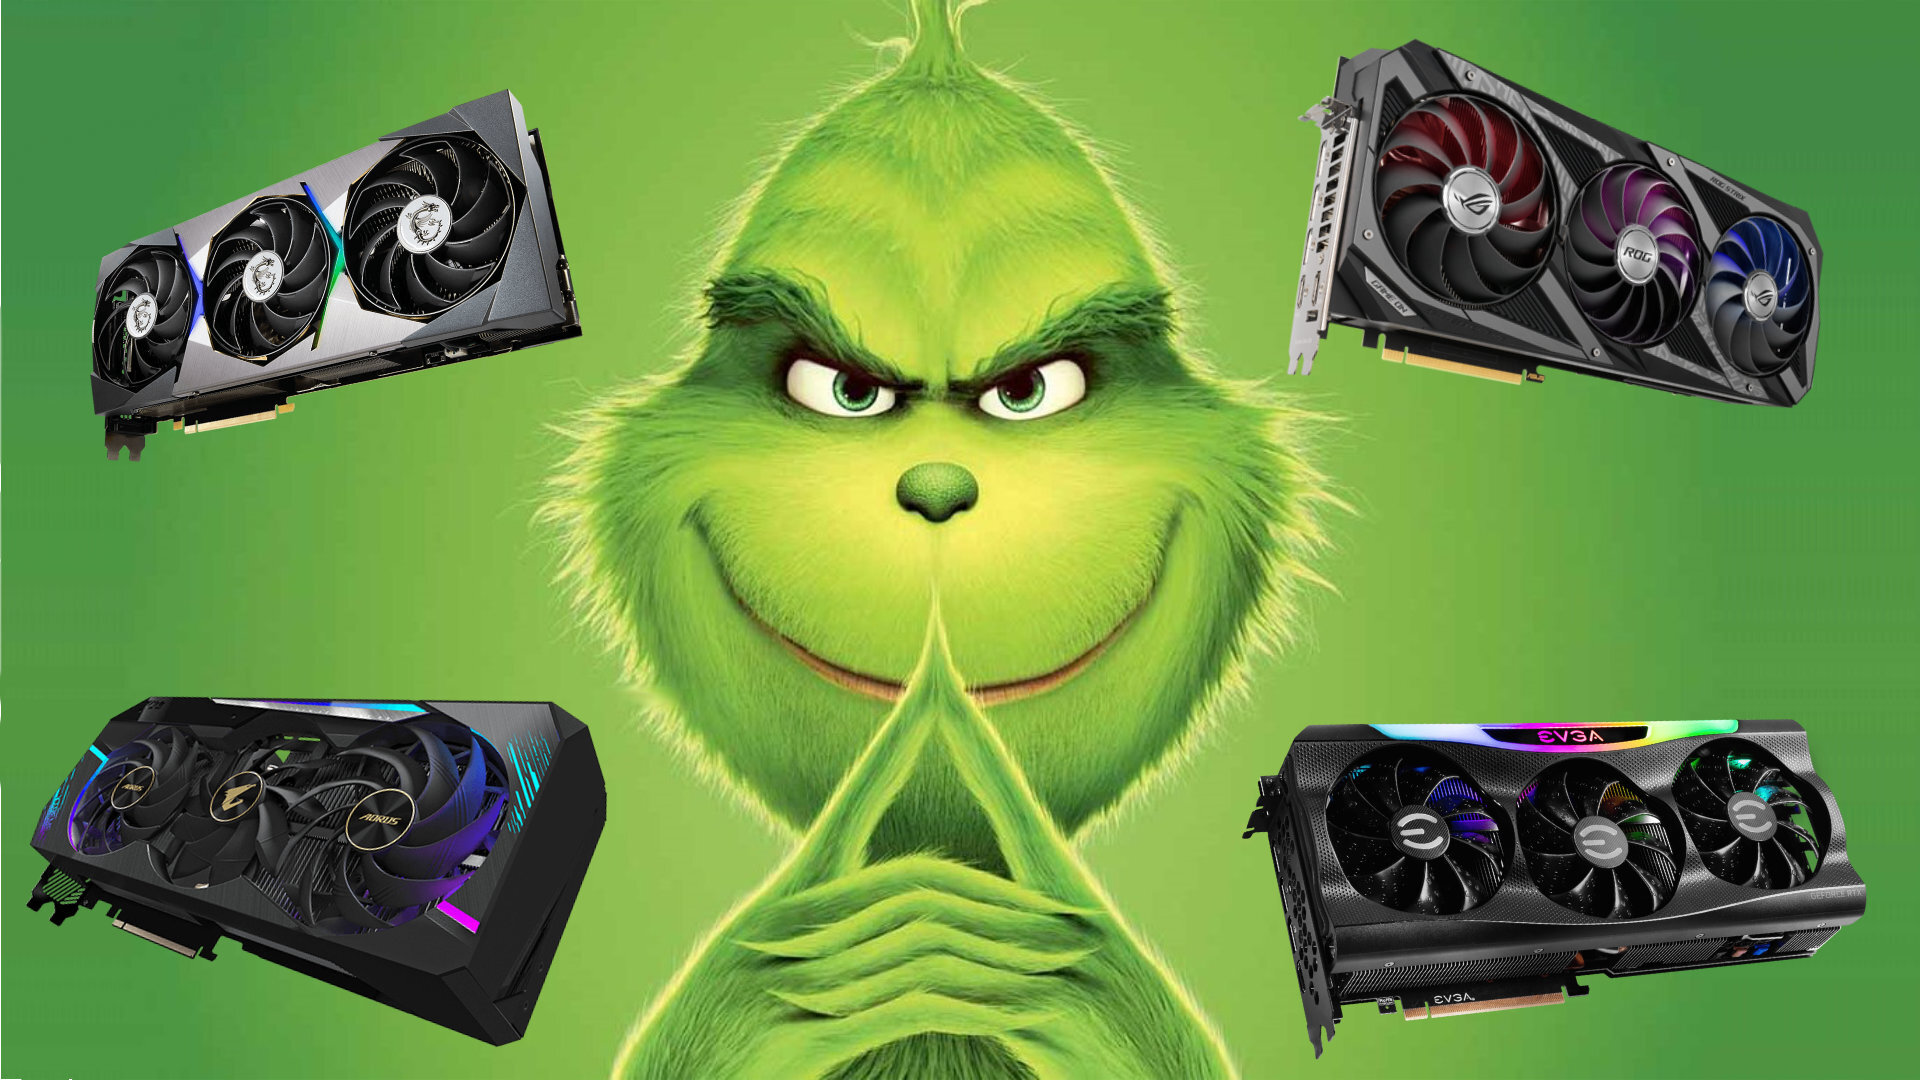 Congress could stop Grinch bots snatching RTX 4000 GPUs next Christmas